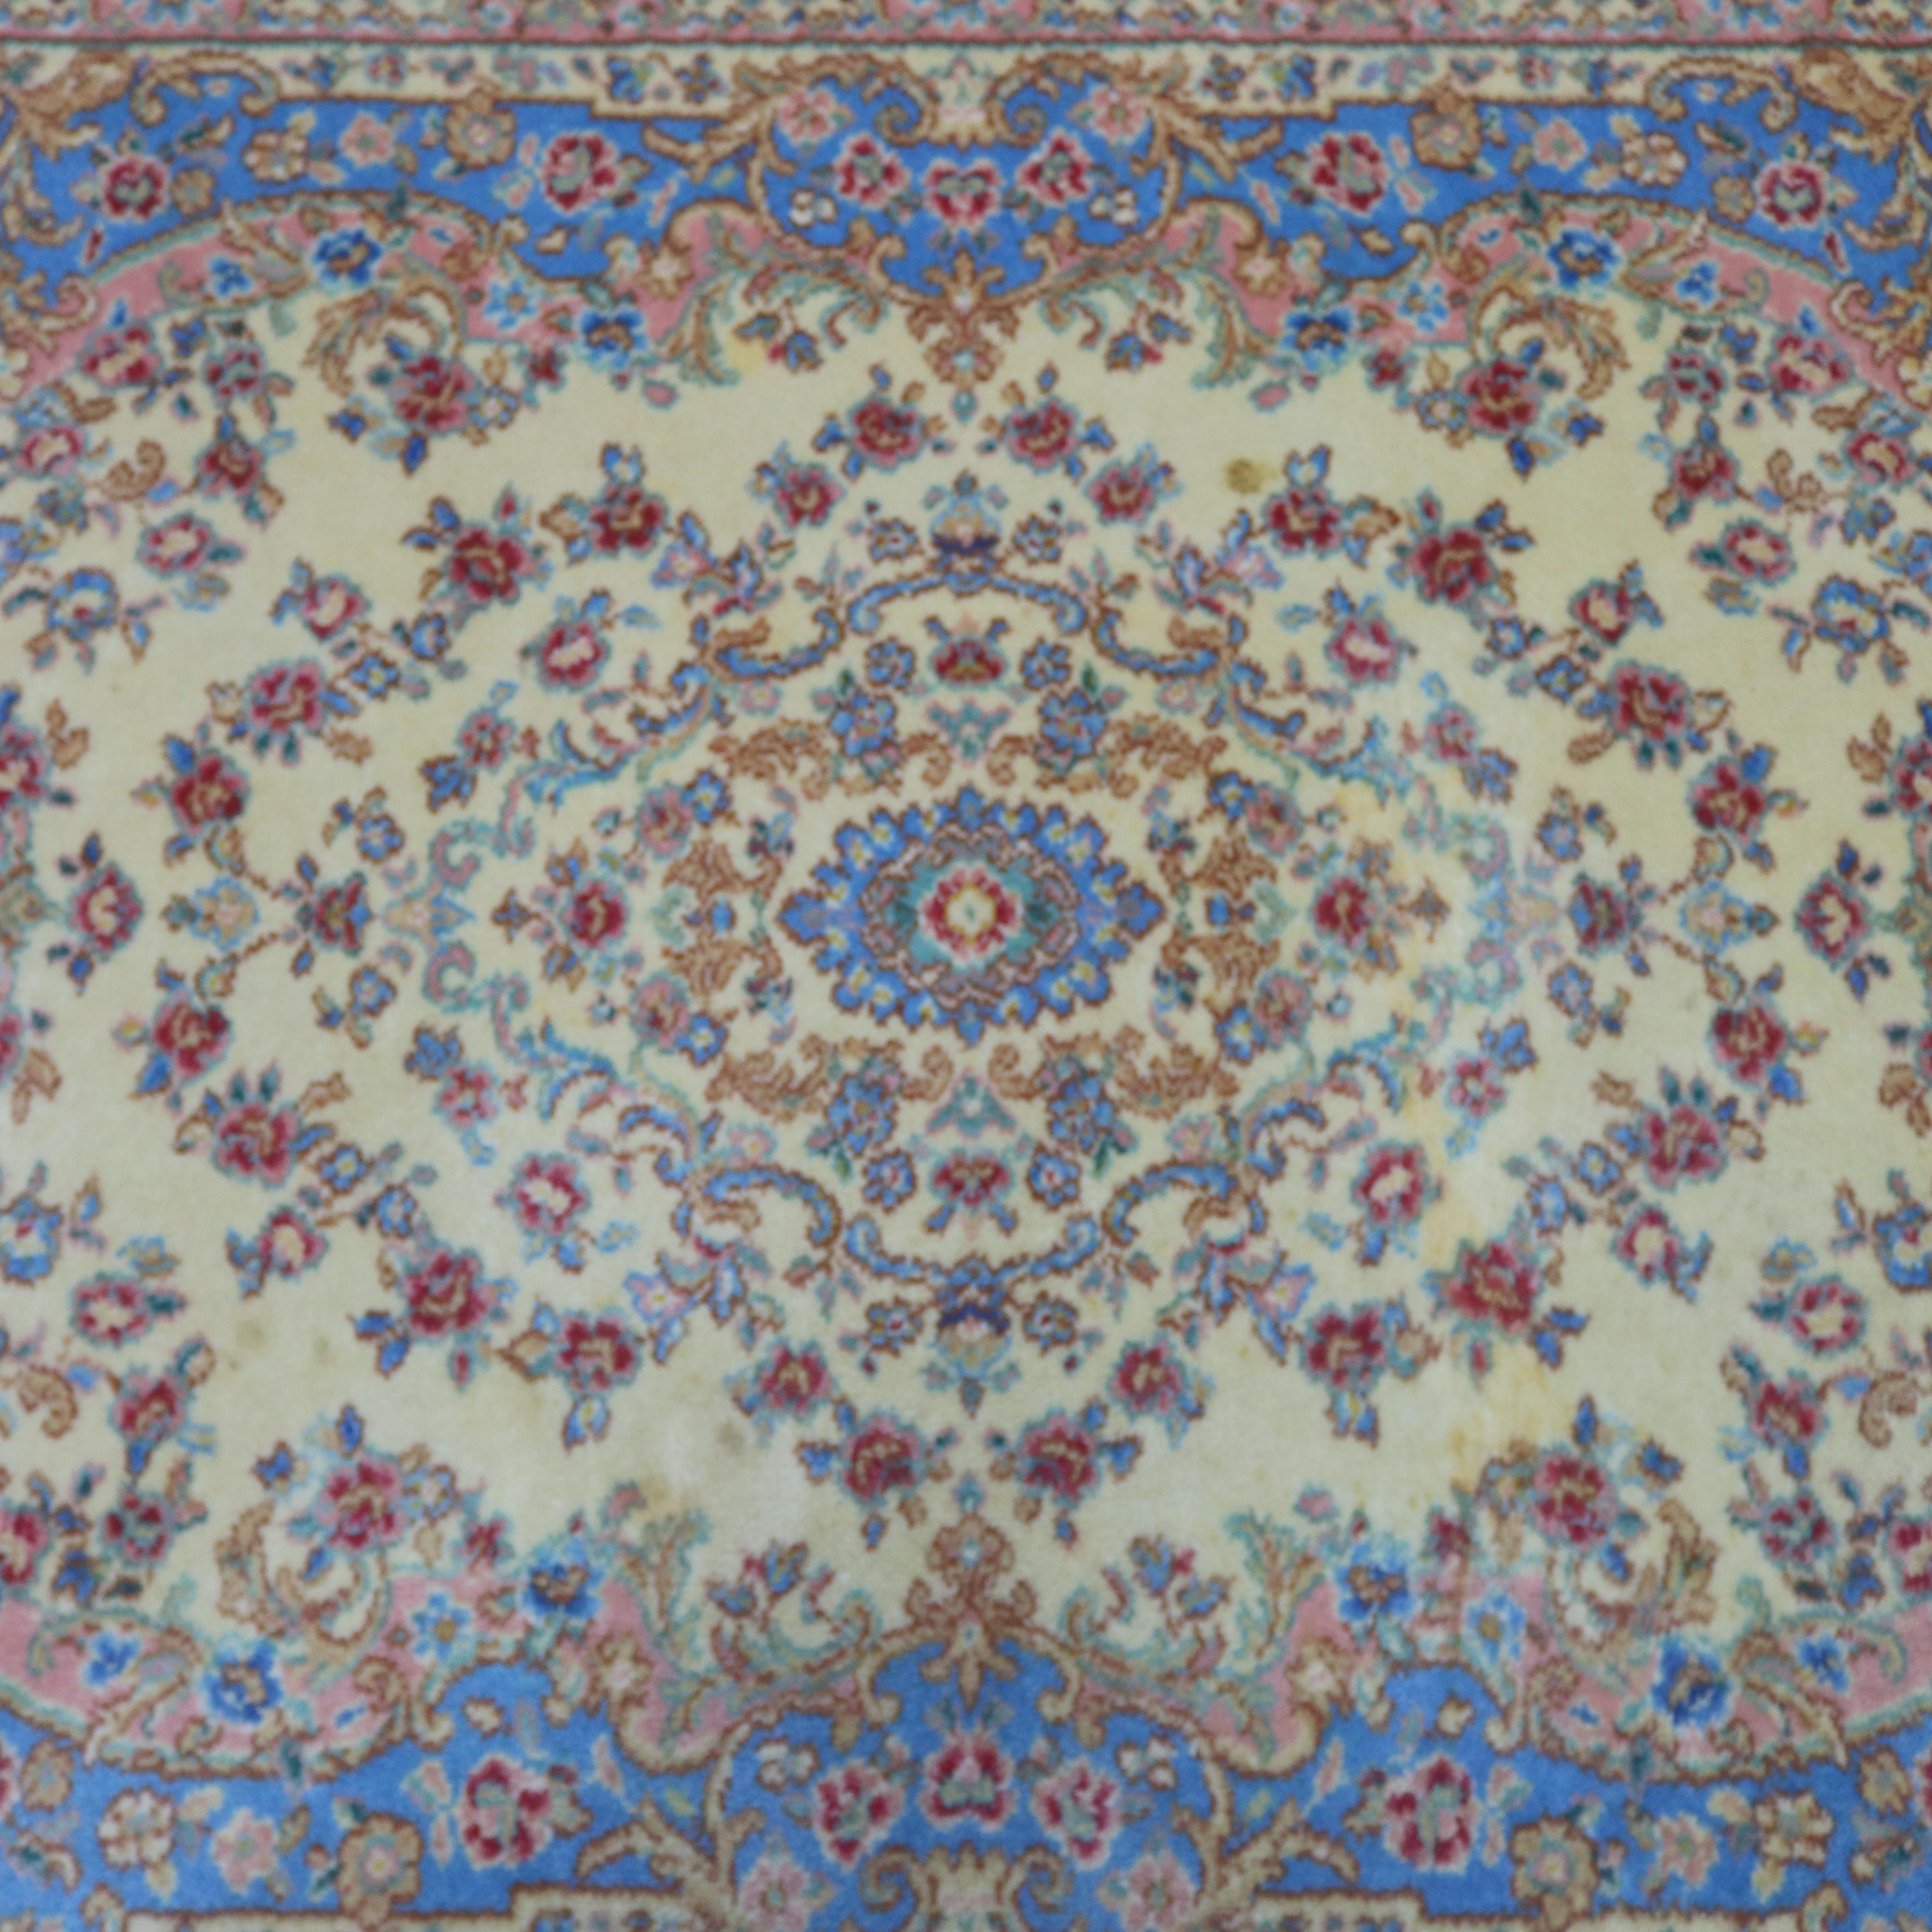 A vintage Karastan ivory Medallion #711 oriental rug offers blue, white and ink in pastel color palette with floral motif, circa 1950.

Measures - 4.3' x 6'.